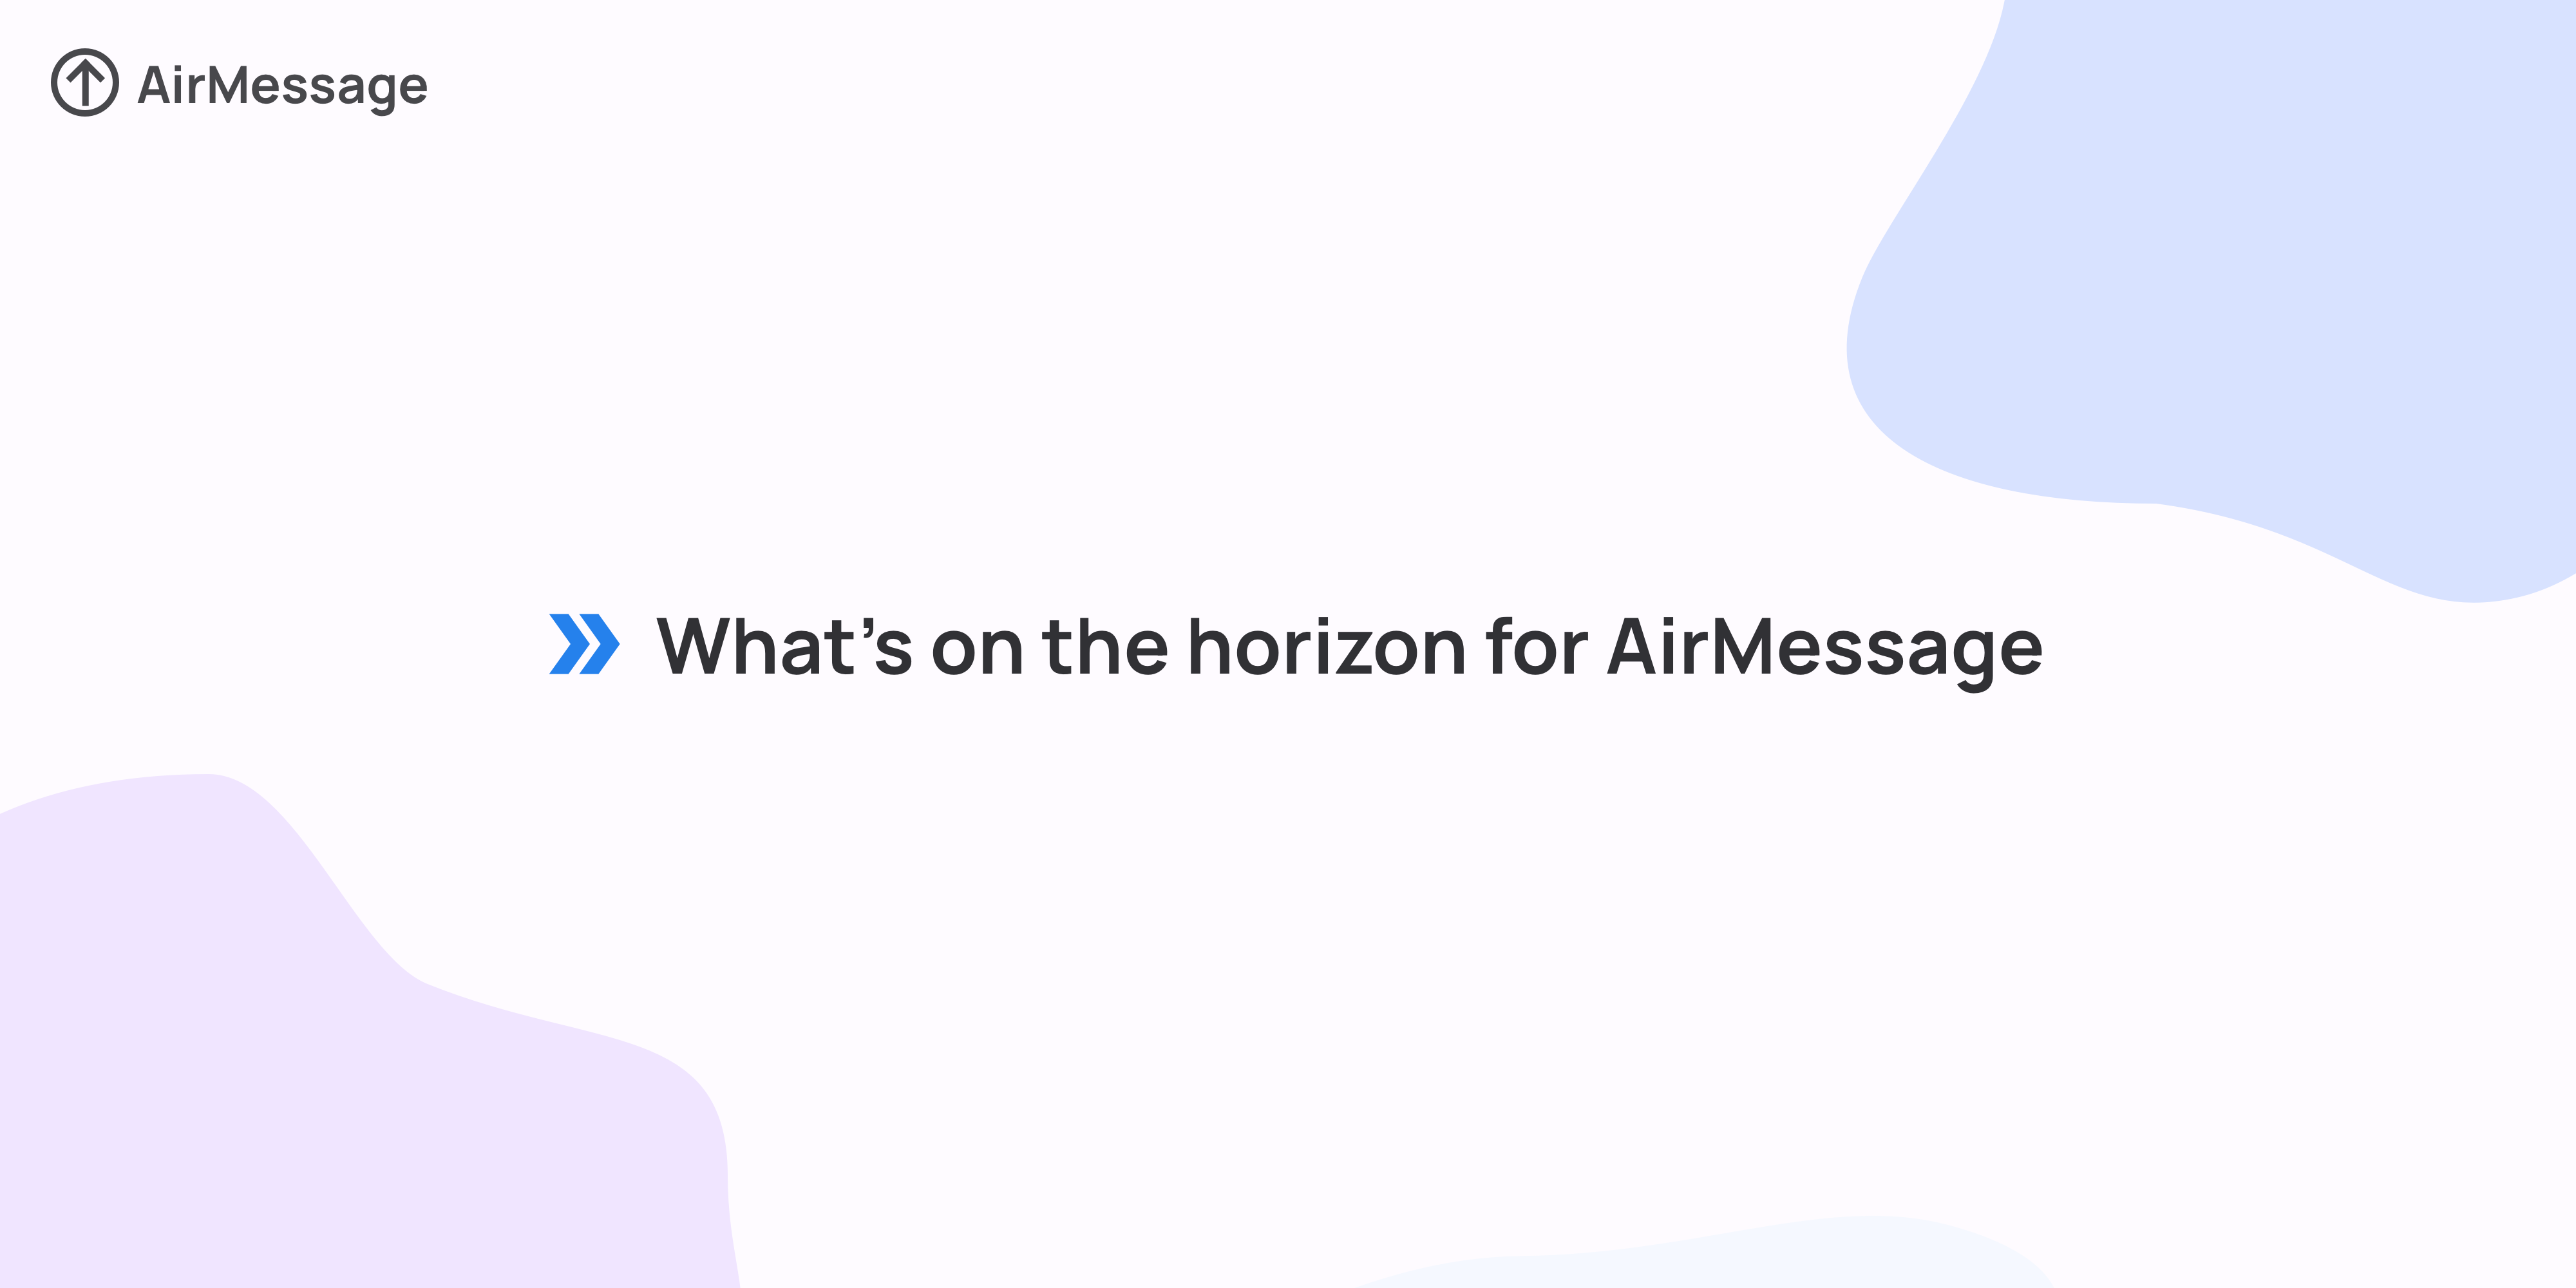 What's on the horizon for AirMessage, with hints of Material Design 3